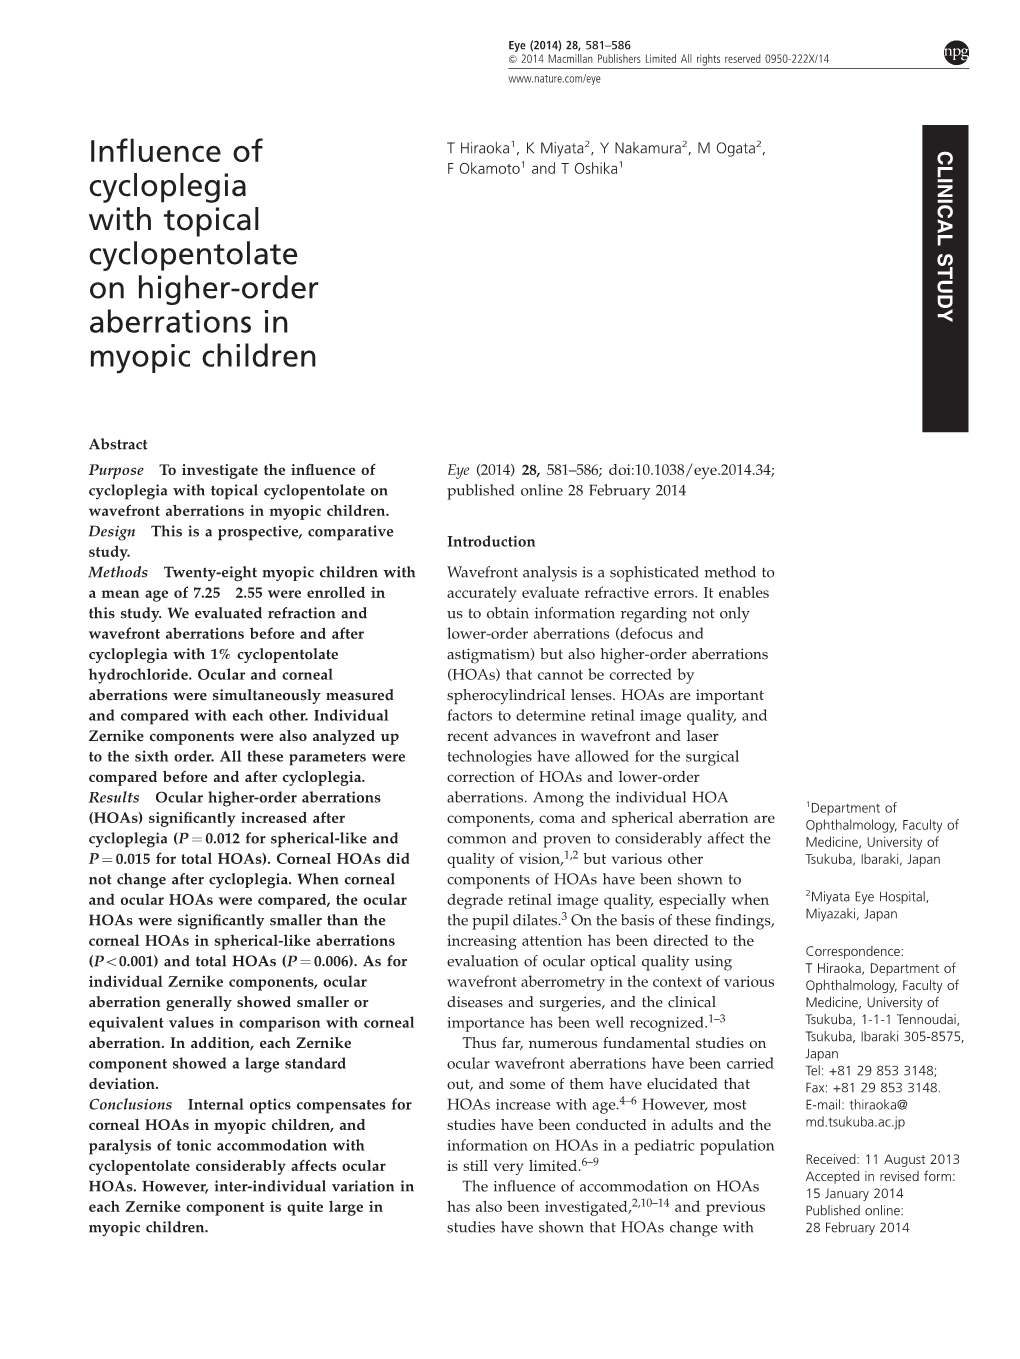 Influence of Cycloplegia with Topical Cyclopentolate on Higher-Order Aberrations in Myopic Children